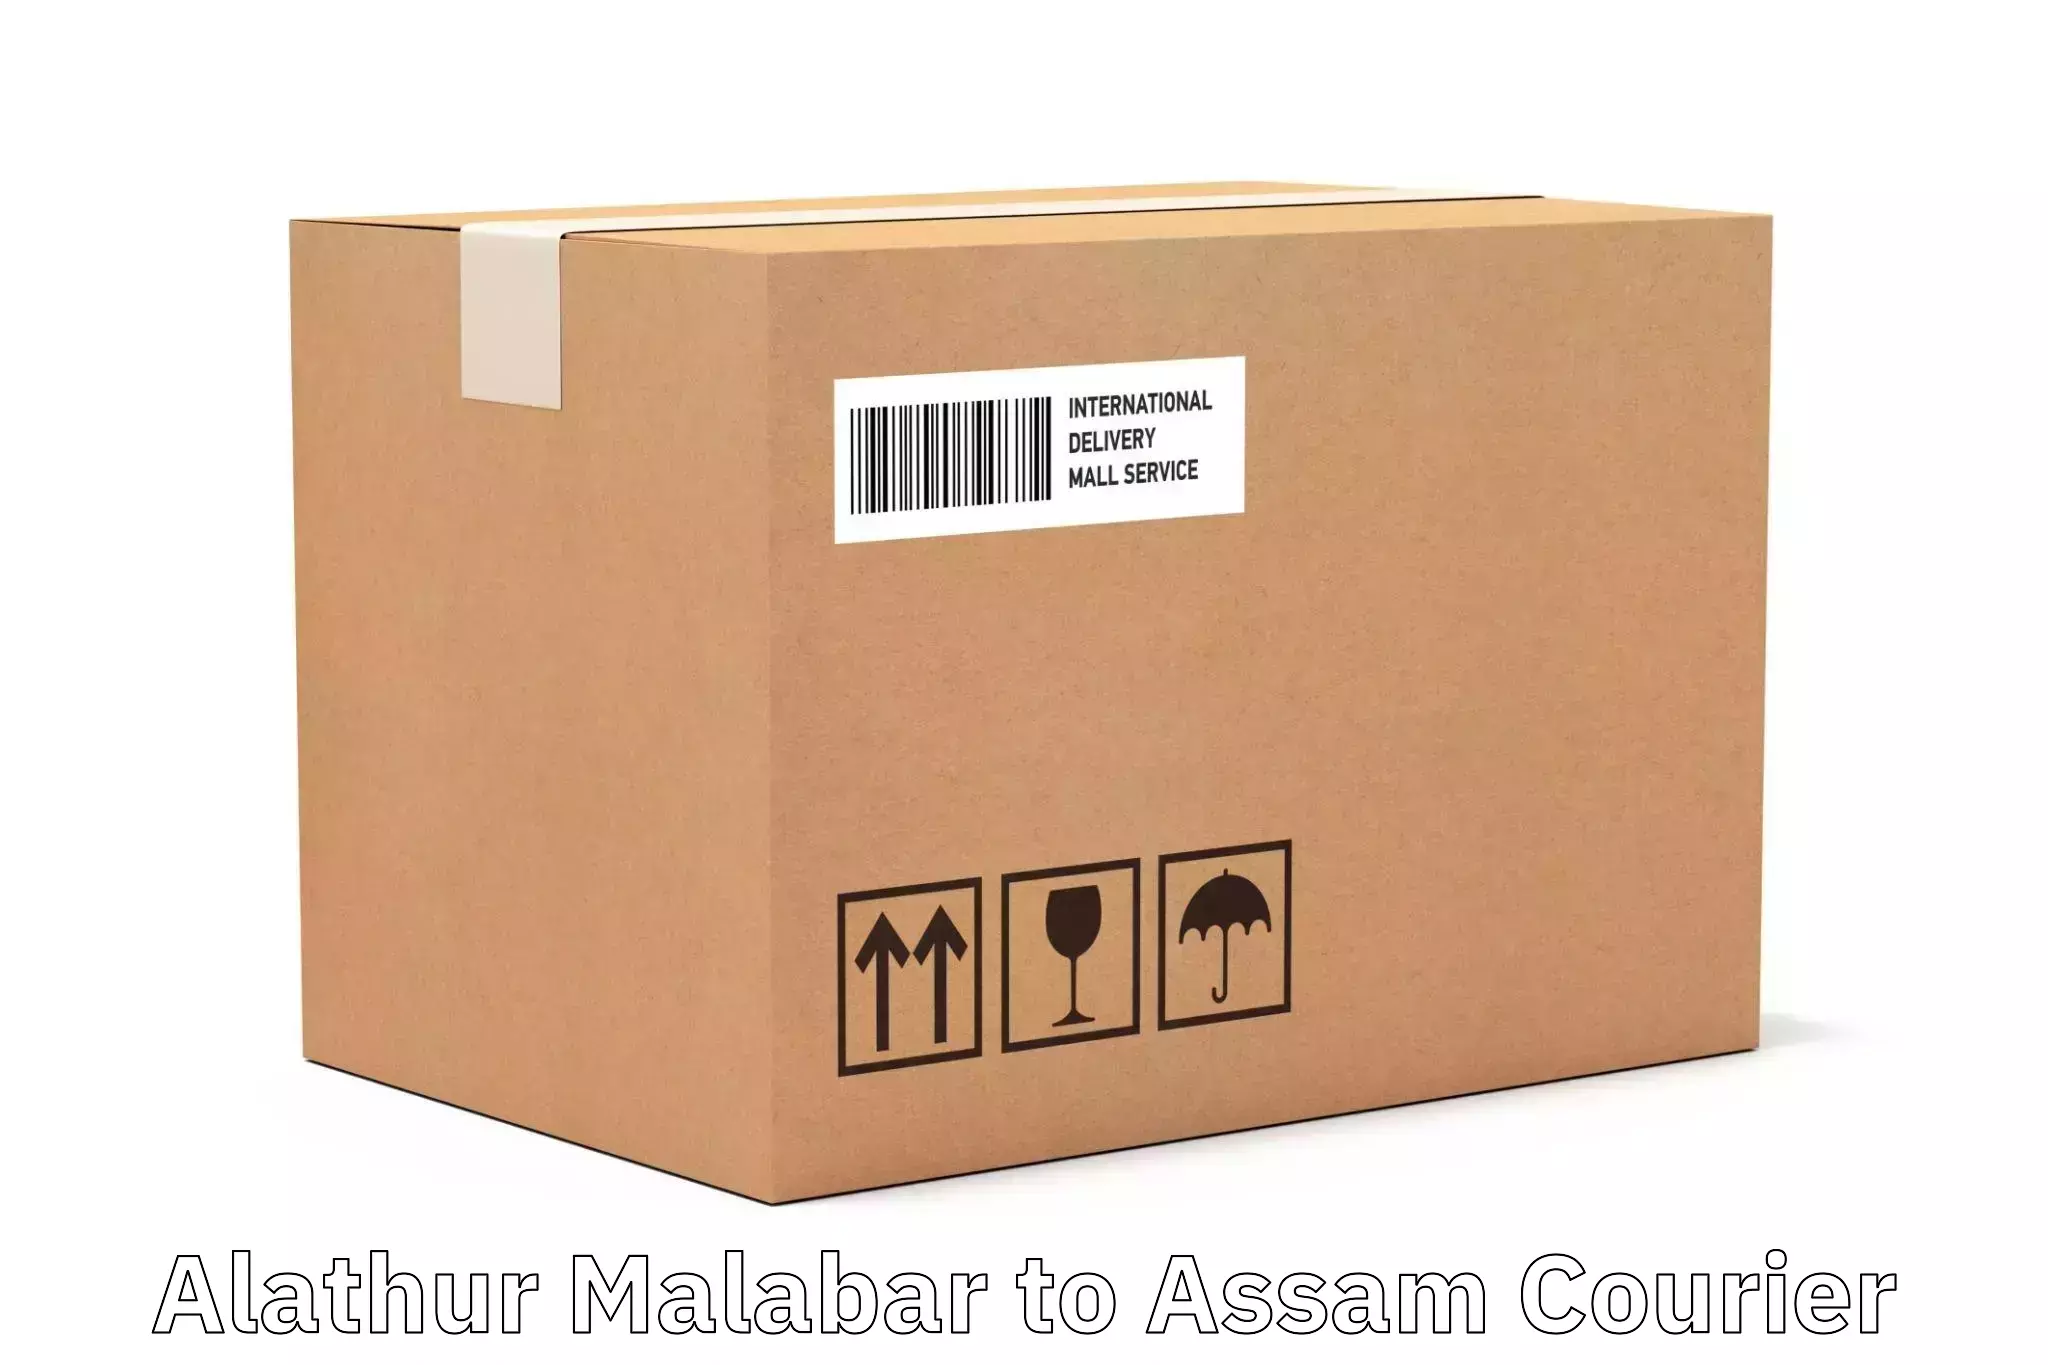 Express delivery capabilities Alathur Malabar to Dhemaji